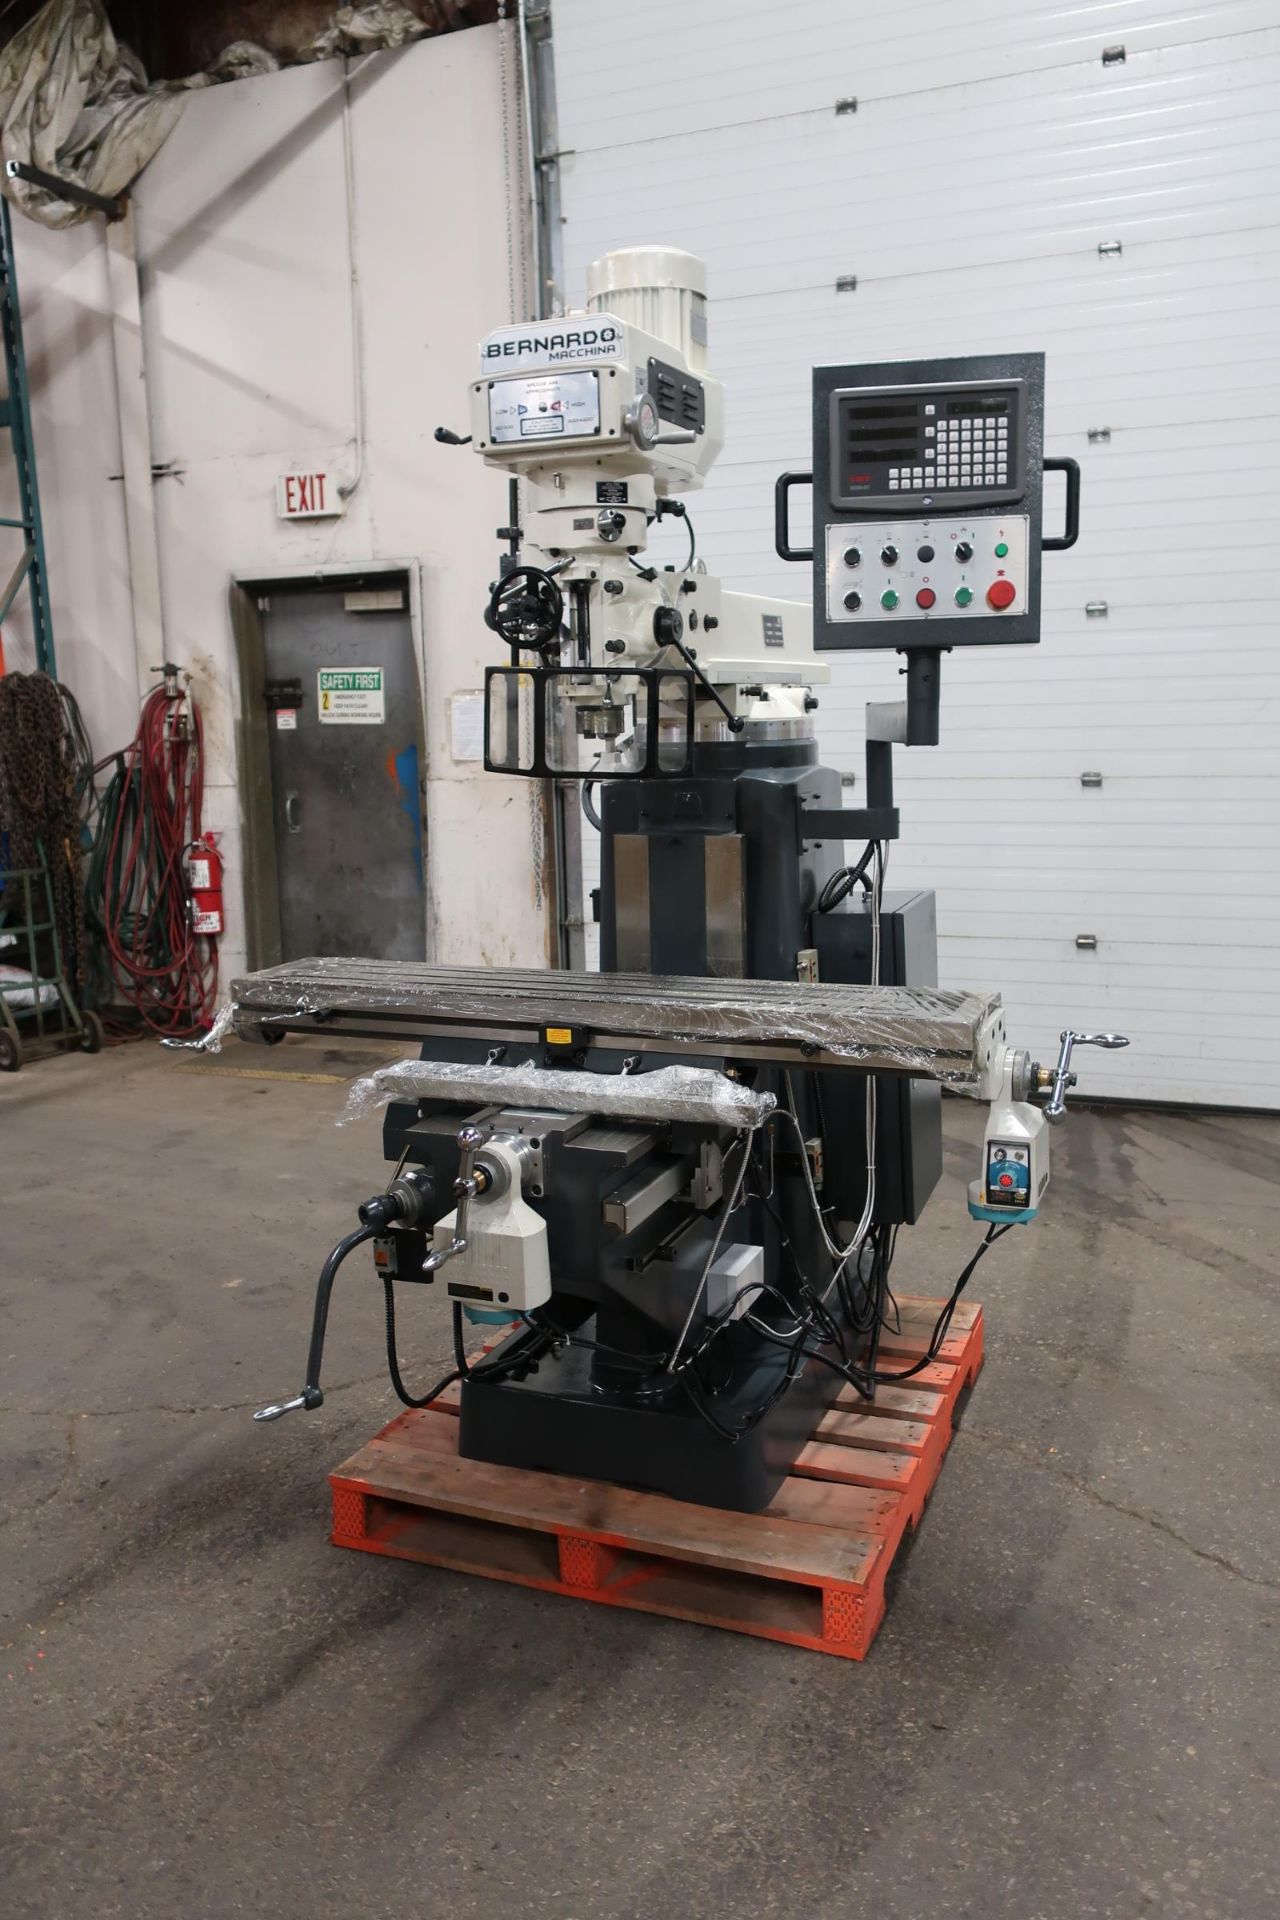 Bernardo MINT / UNUSED Milling Machine with Full Power Feed Table on ALL AXIS (X, Y and Z) with